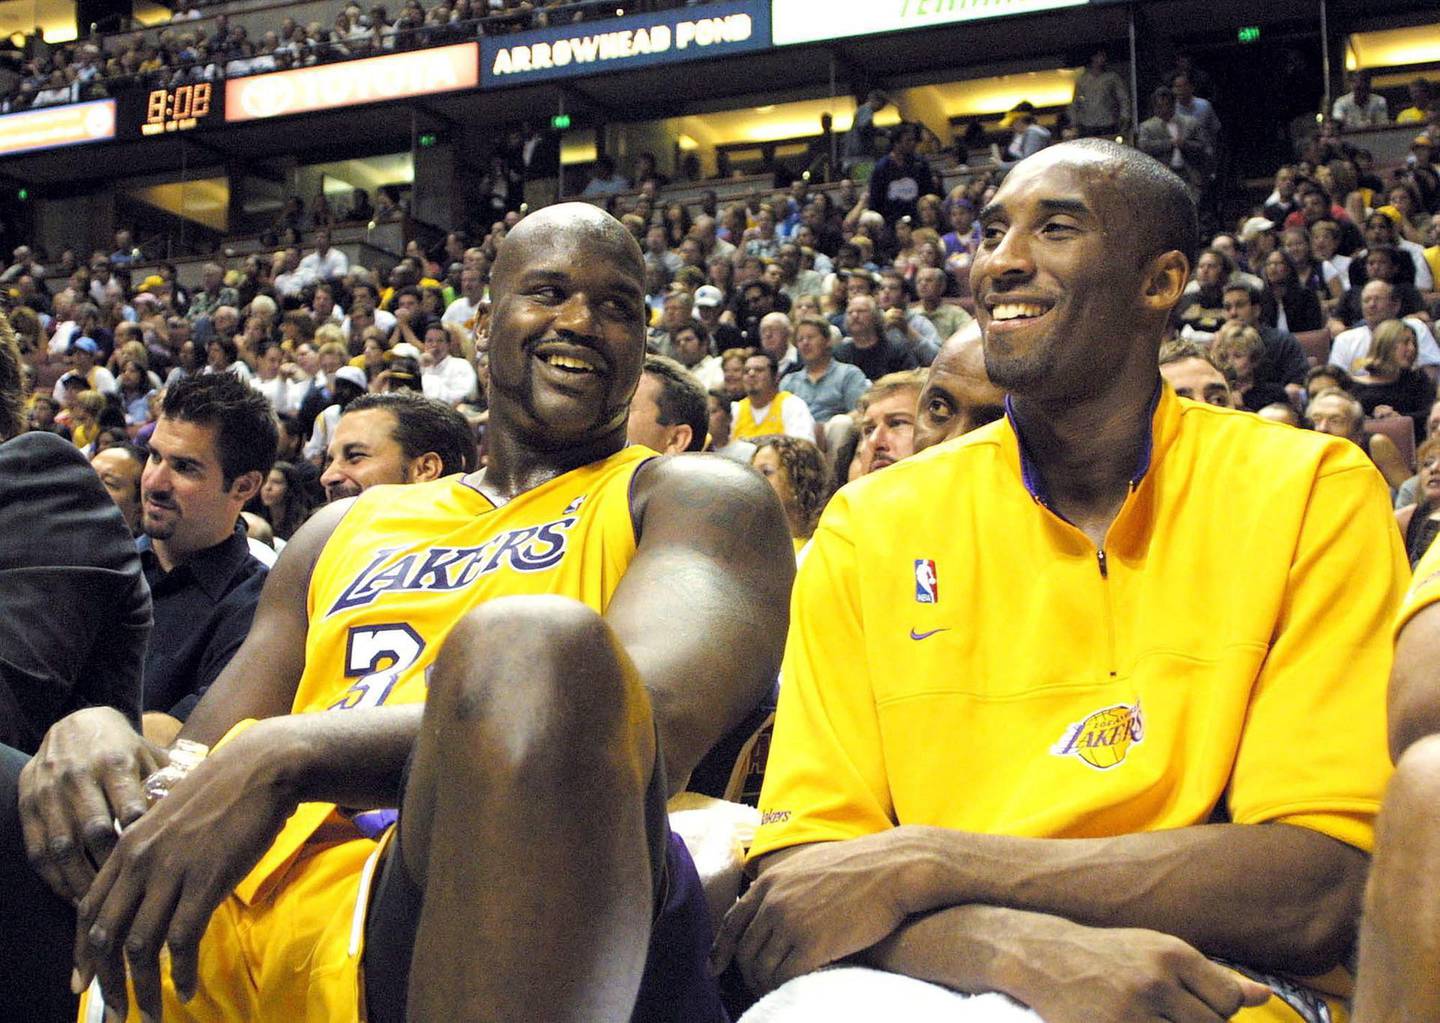 epa08168220 (FILE) Los Angeles Lakers Kobe Bryant (R) and team mate Shaquille O'Neal share a laugh on the bench during an exhibition game against Los Angeles Clippers at the Arrowhead Pond in Anaheim, California, USA, 23 October 2003 (reissued 26 January 2020). According to media reports former US basketball player Kobe Bryant has died in a helicopter crash in Calabasas, California, USA on 26 January 2020. He was 41.  EPA/FRANCIS SPECKER  SHUTTERSTOCK OUT